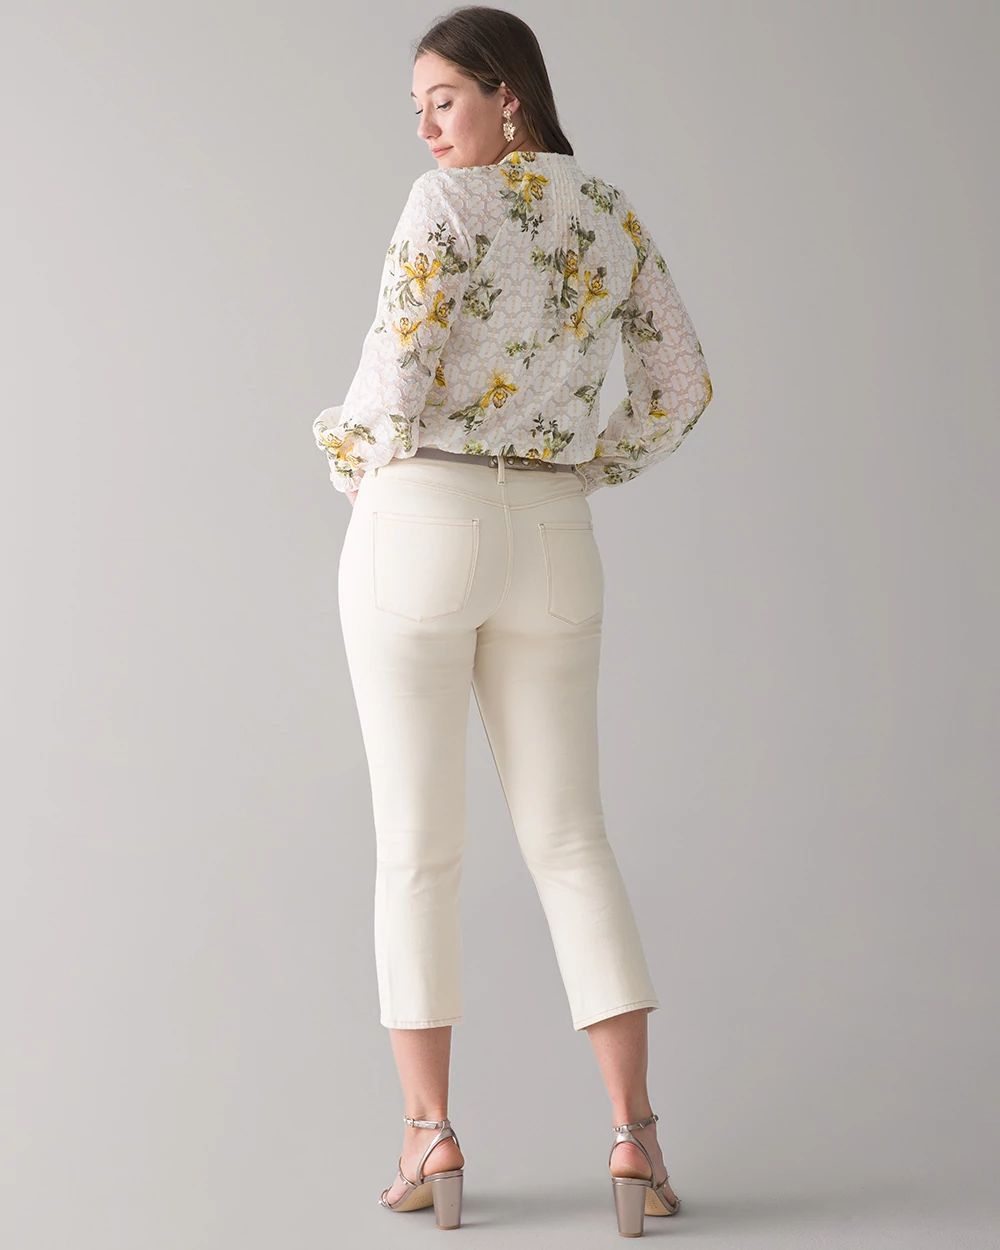 Curvy-Fit High-Rise Natural Boot Cut Cropped Jeans click to view larger image.